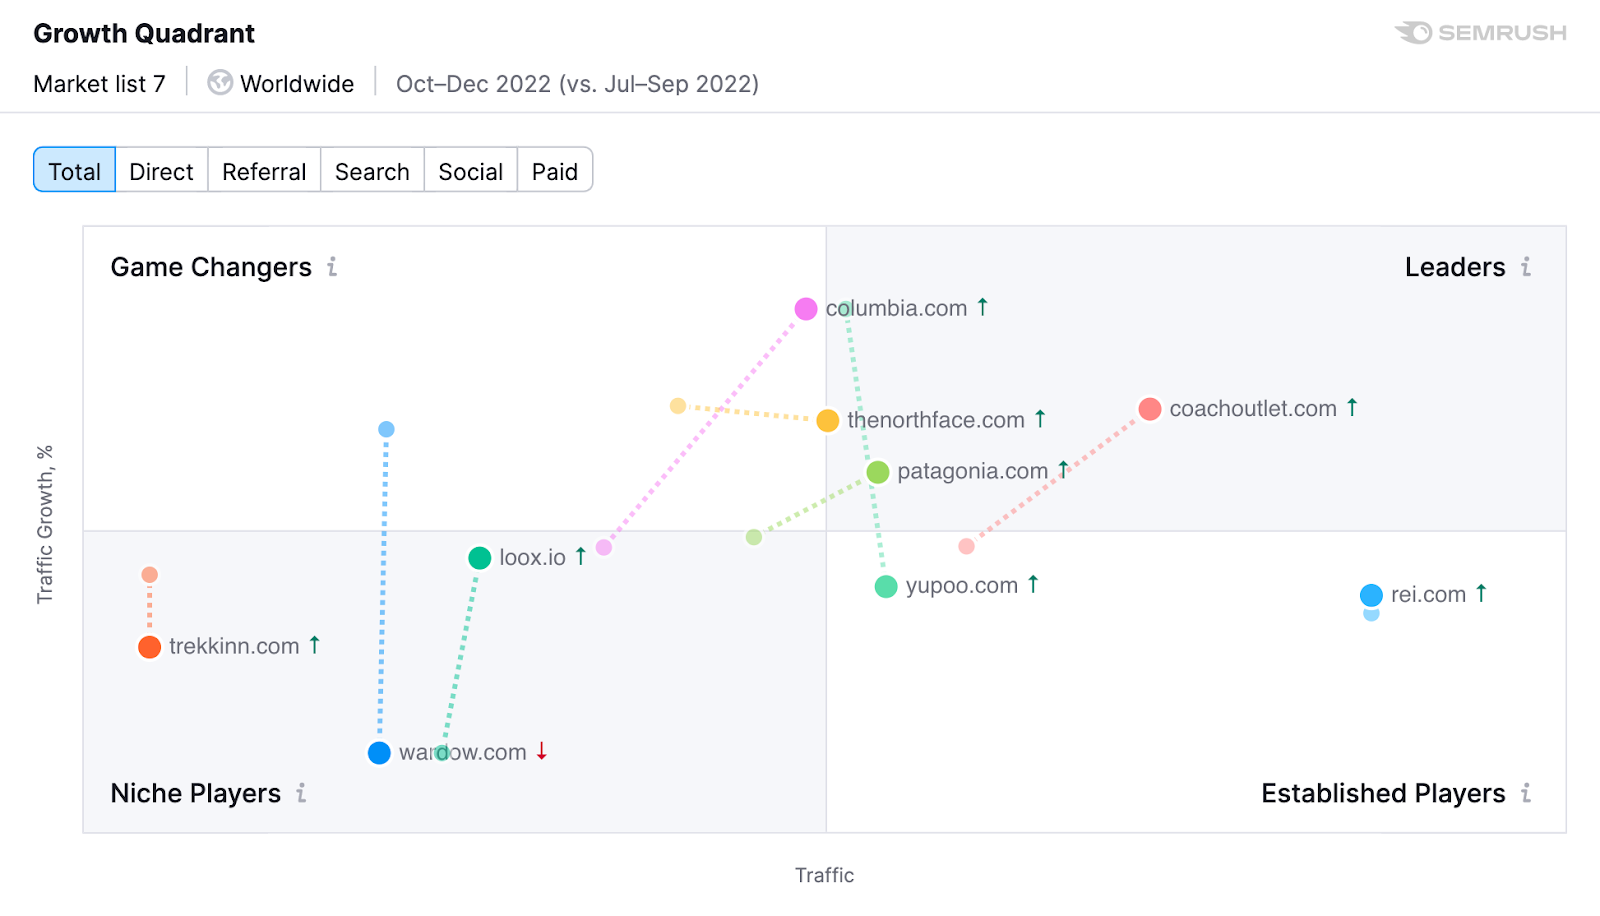 The Market Explorer tool’s Growth Quadrant feature shows a colorful 4-quadrant graphic of “Game Changers” in the industry—a metric that showcases brands with high growth potential. Some of the featured brands in this example include The North Face, Patagonia, Columbia, and REI.